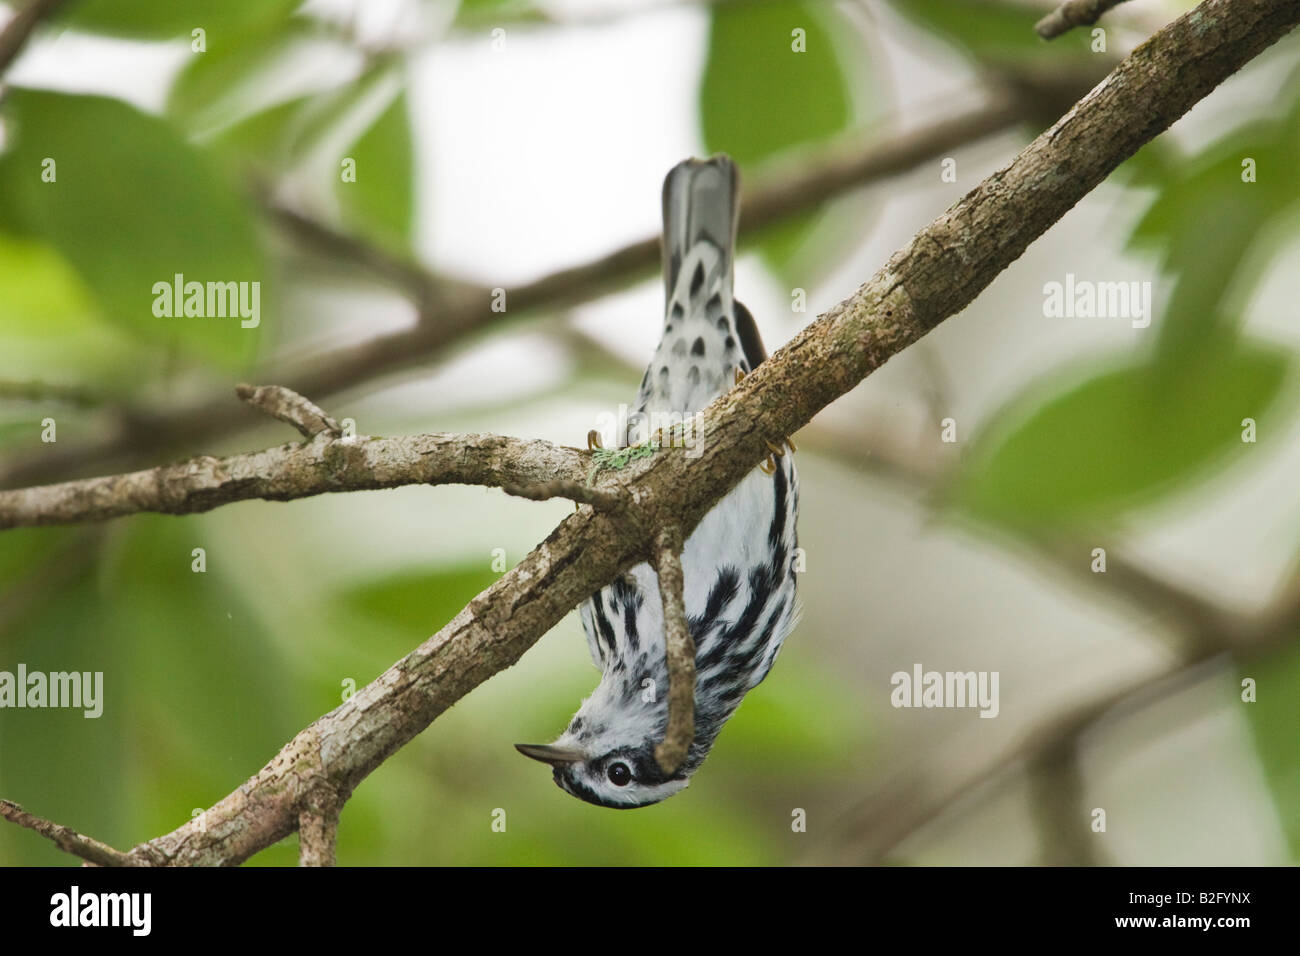 Black and white Warbler (Mniotilta varia) hanging upside down on a branch Stock Photo